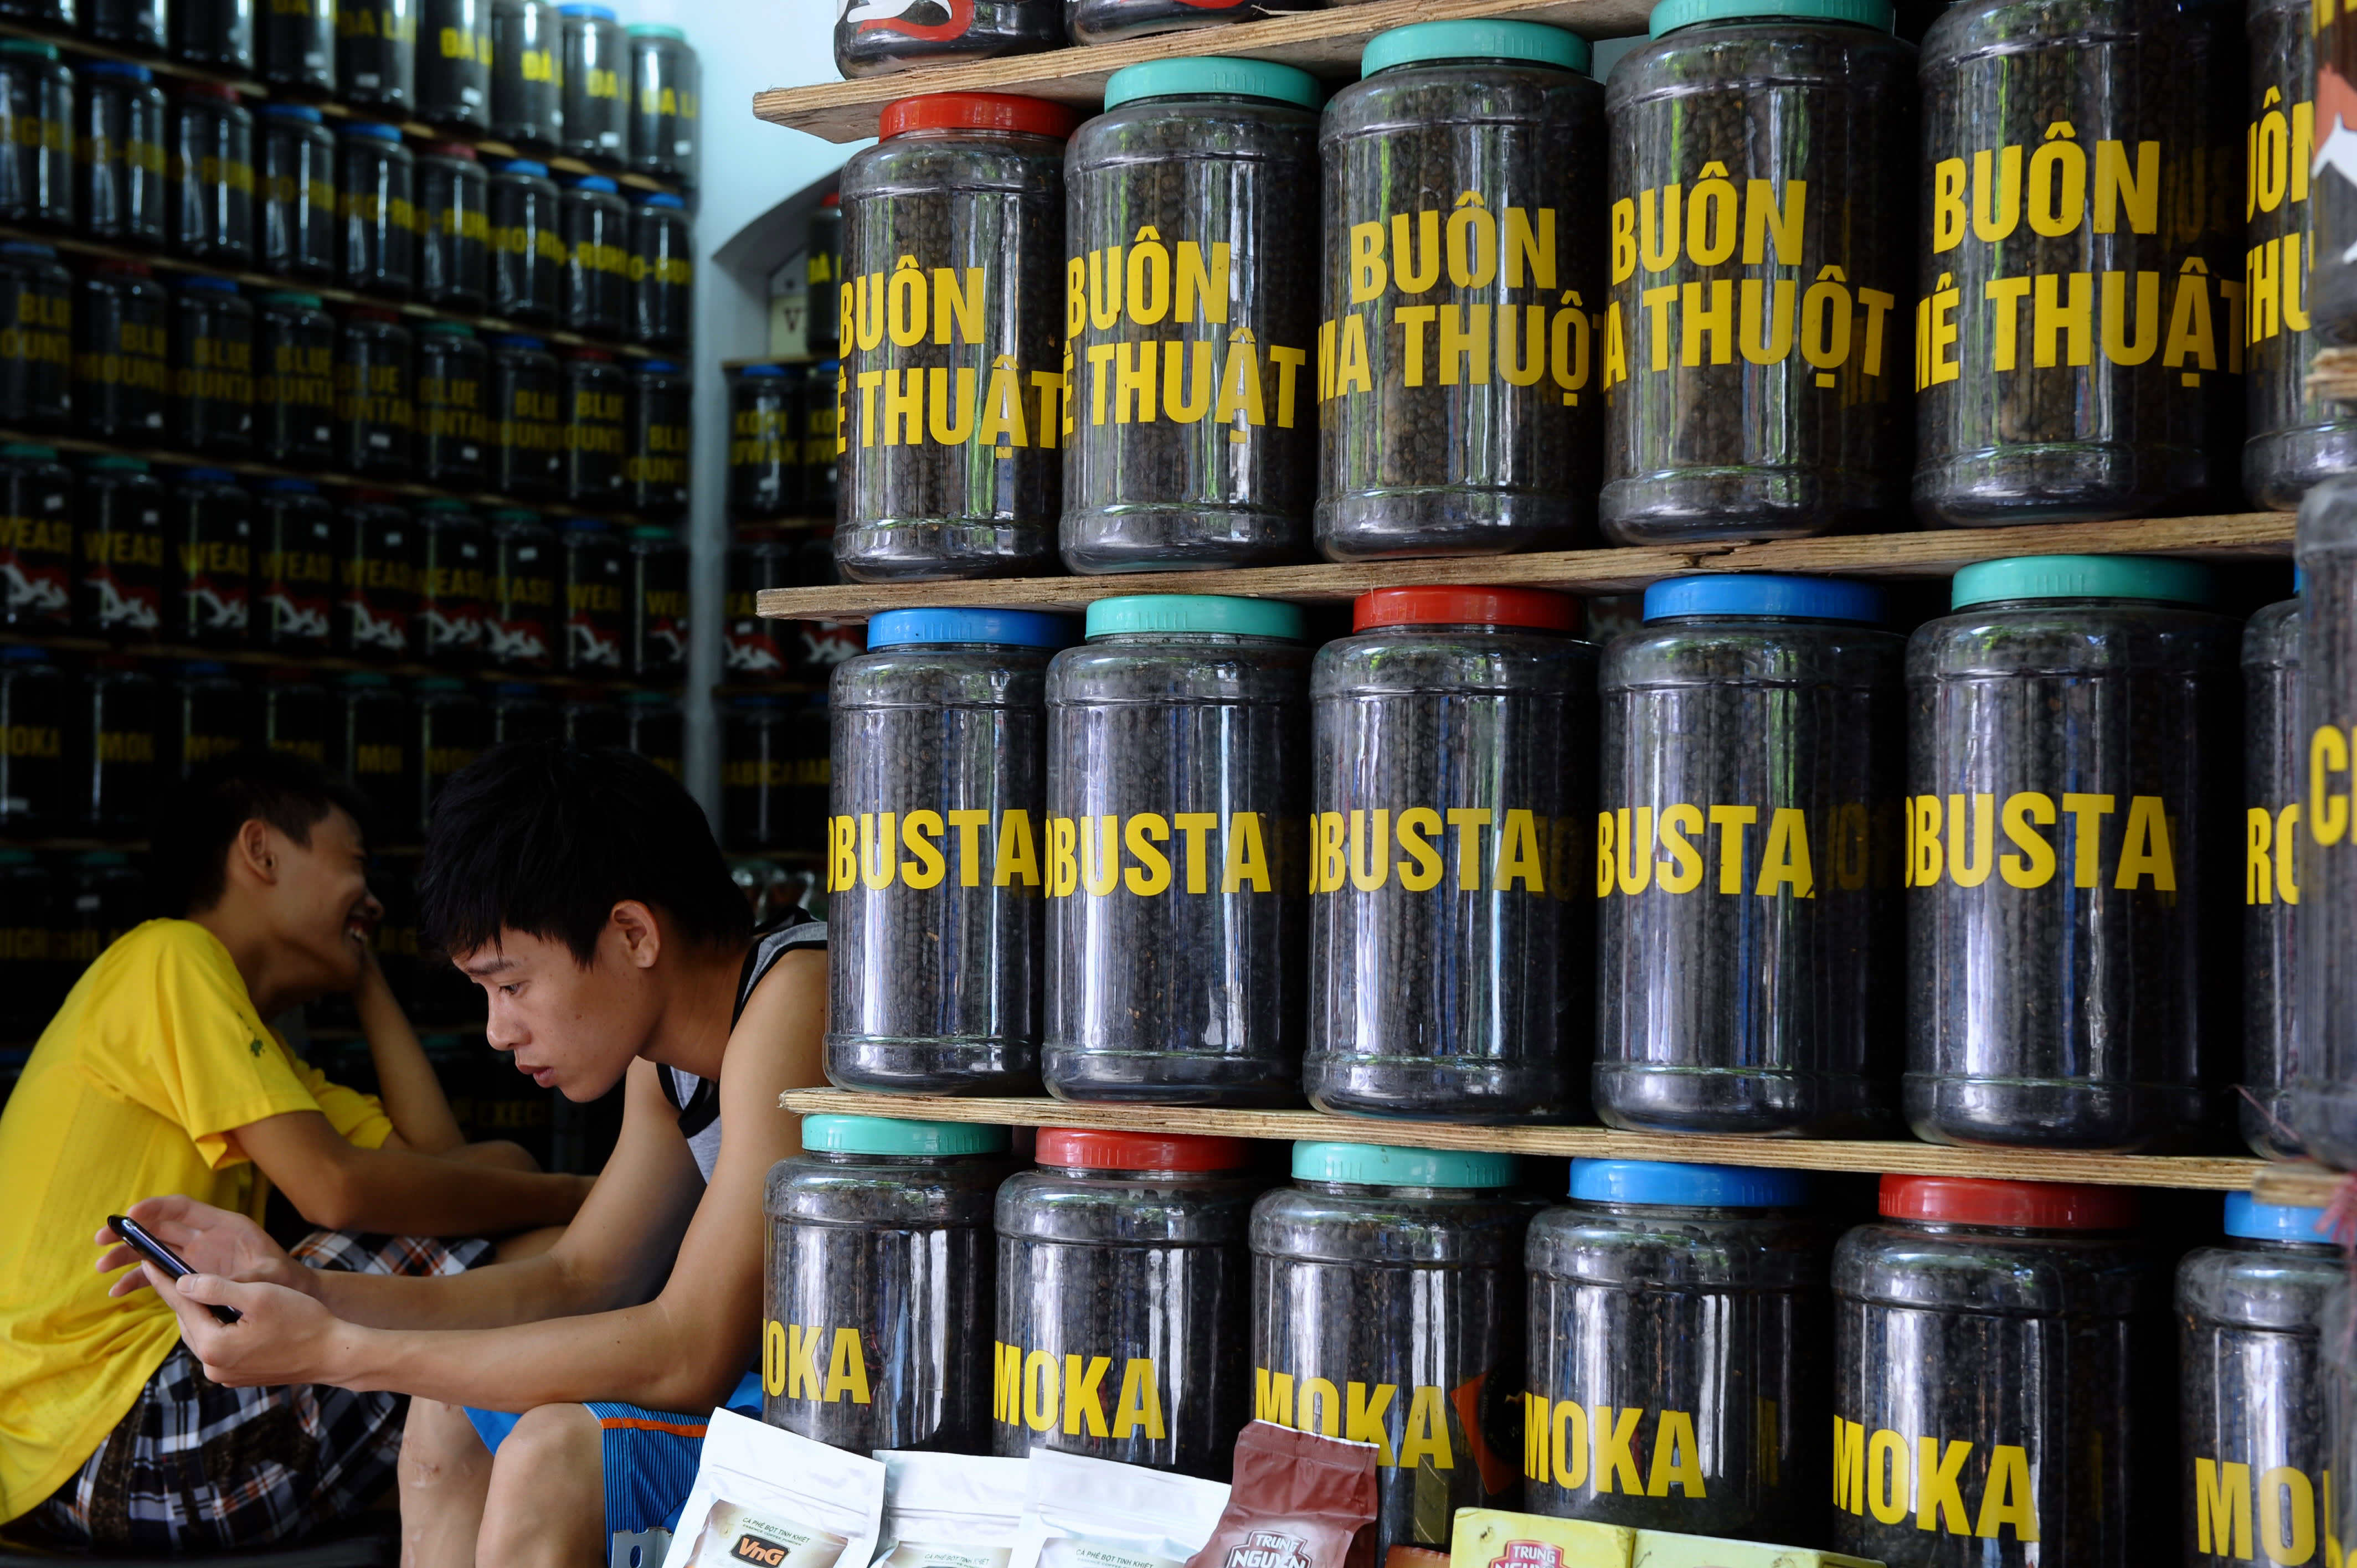 www.cnbc.com: Covid lockdown in Vietnam could keep coffee prices 'relatively high' through 2022